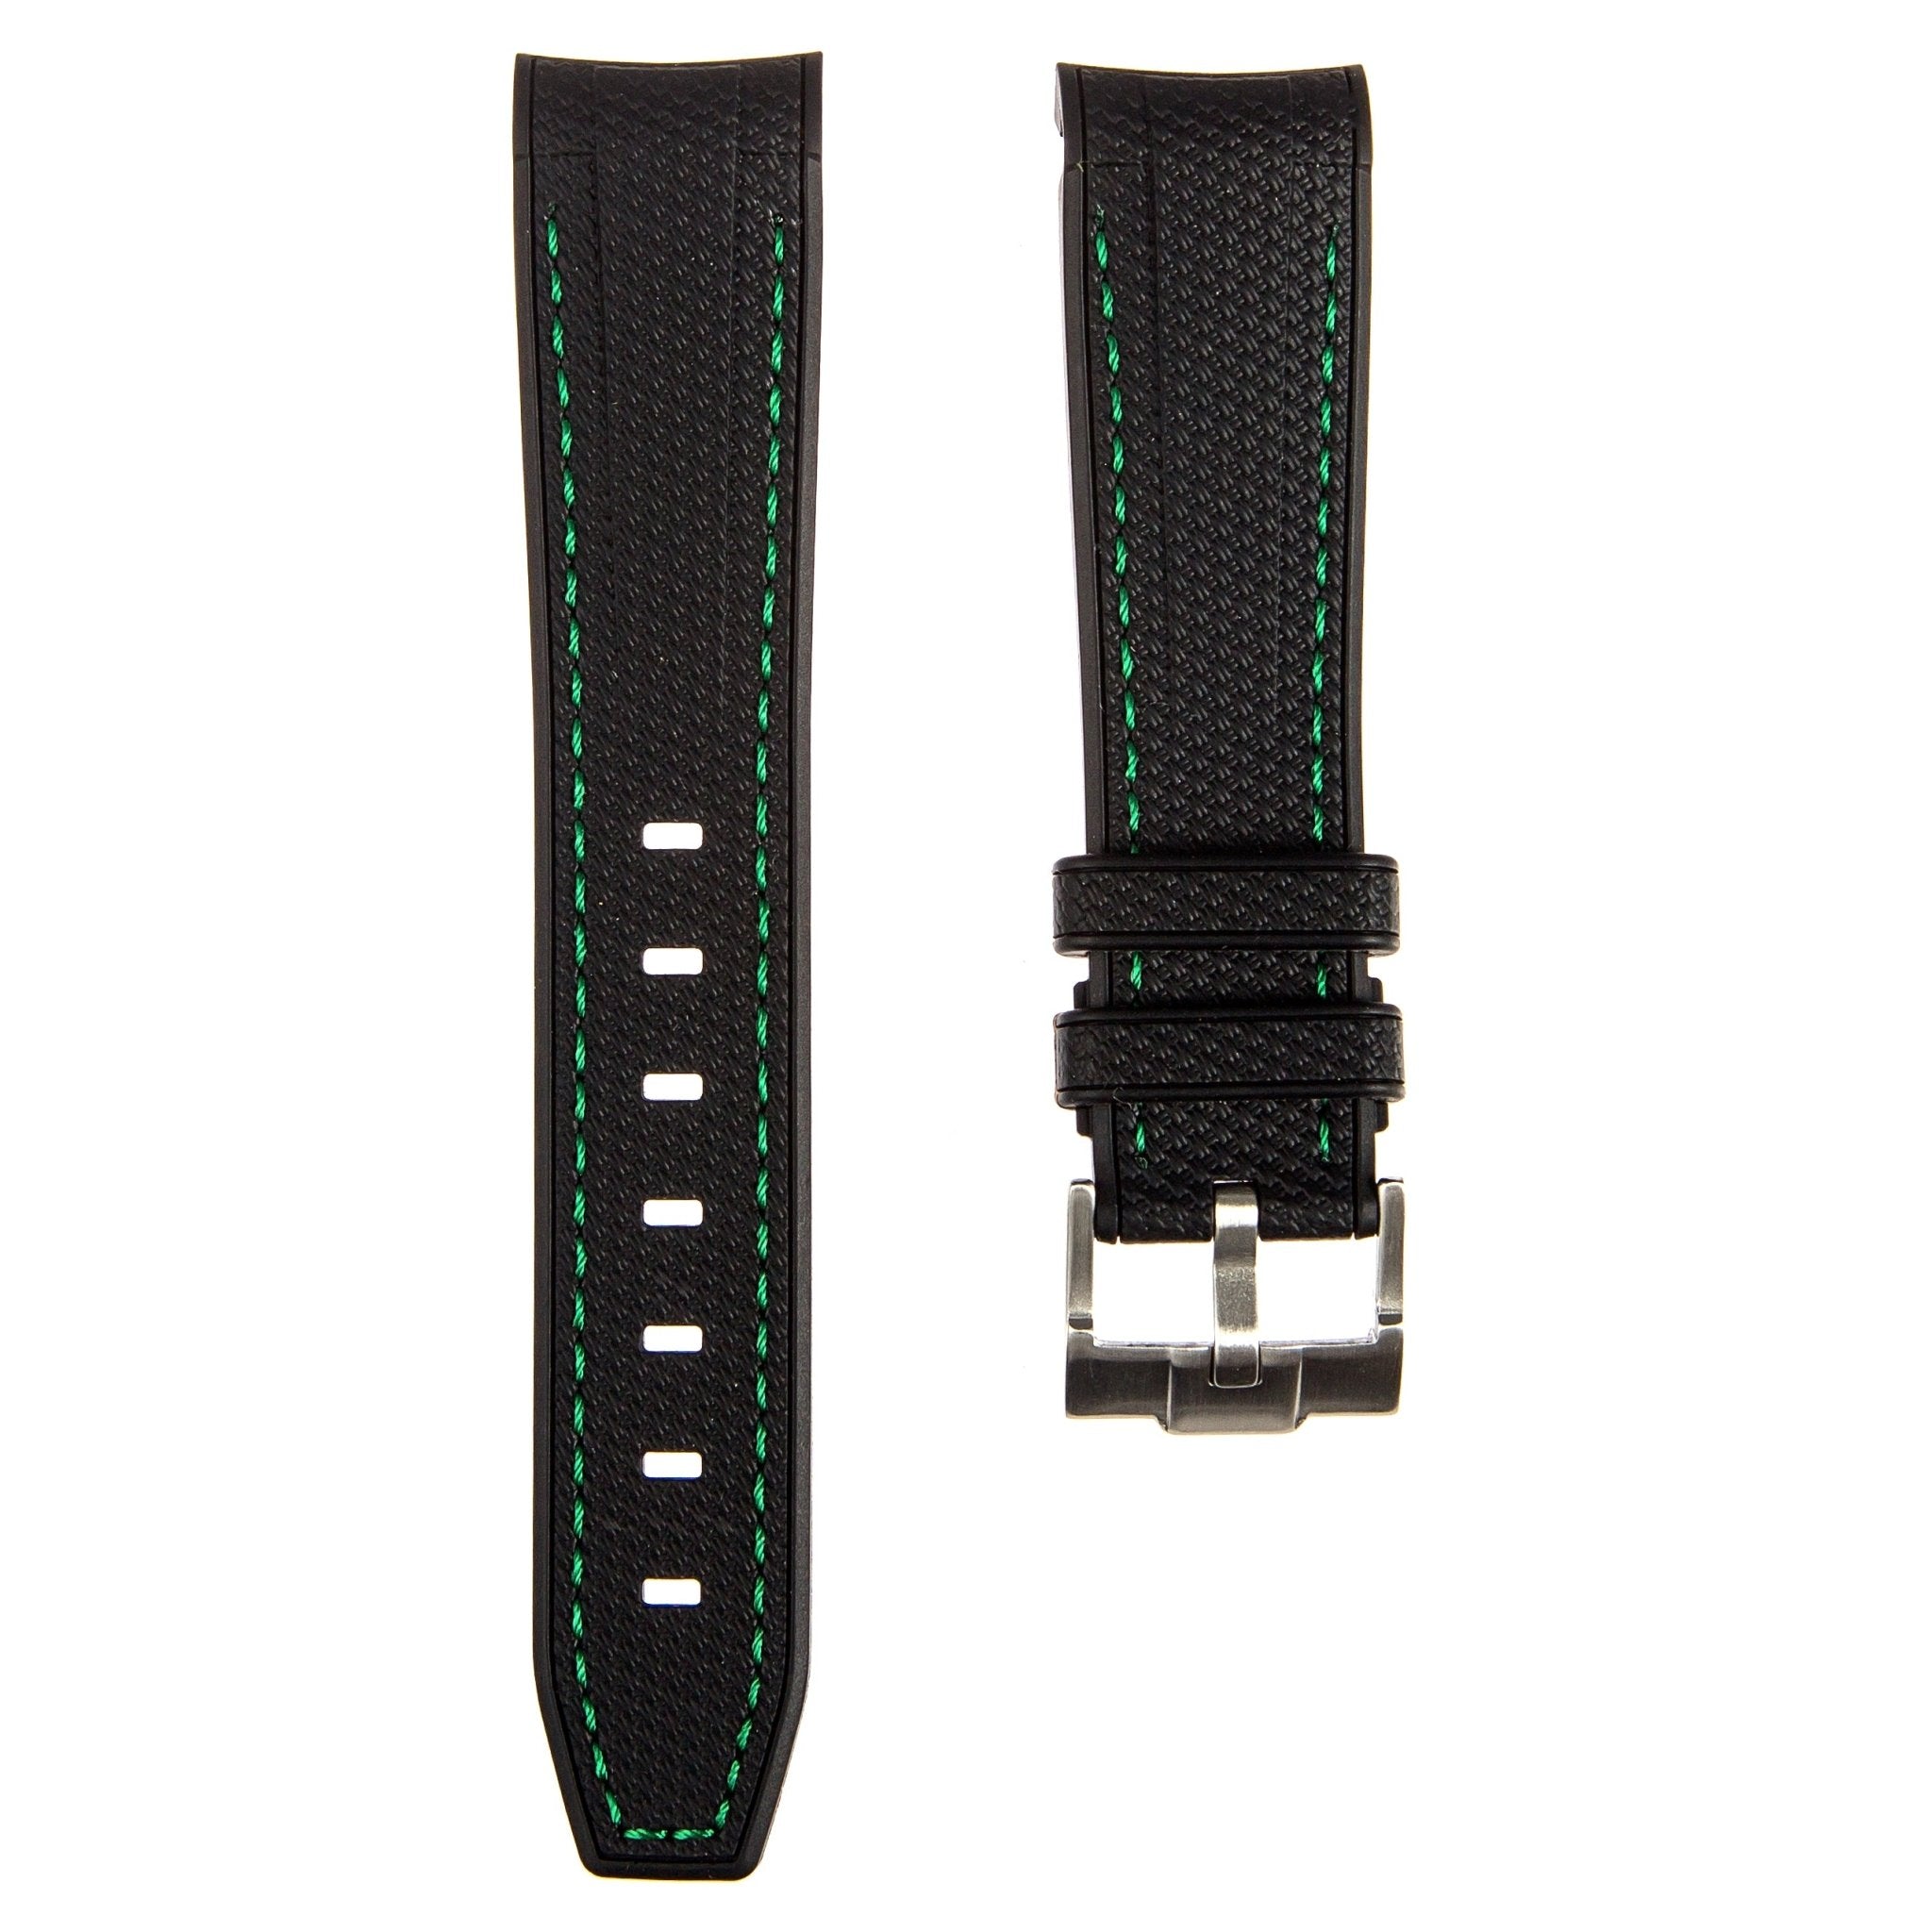 Textured Curved End Premium Silicone Strap – Compatible with Rolex Submariner – Black with Green Stitch (2405) -StrapSeeker